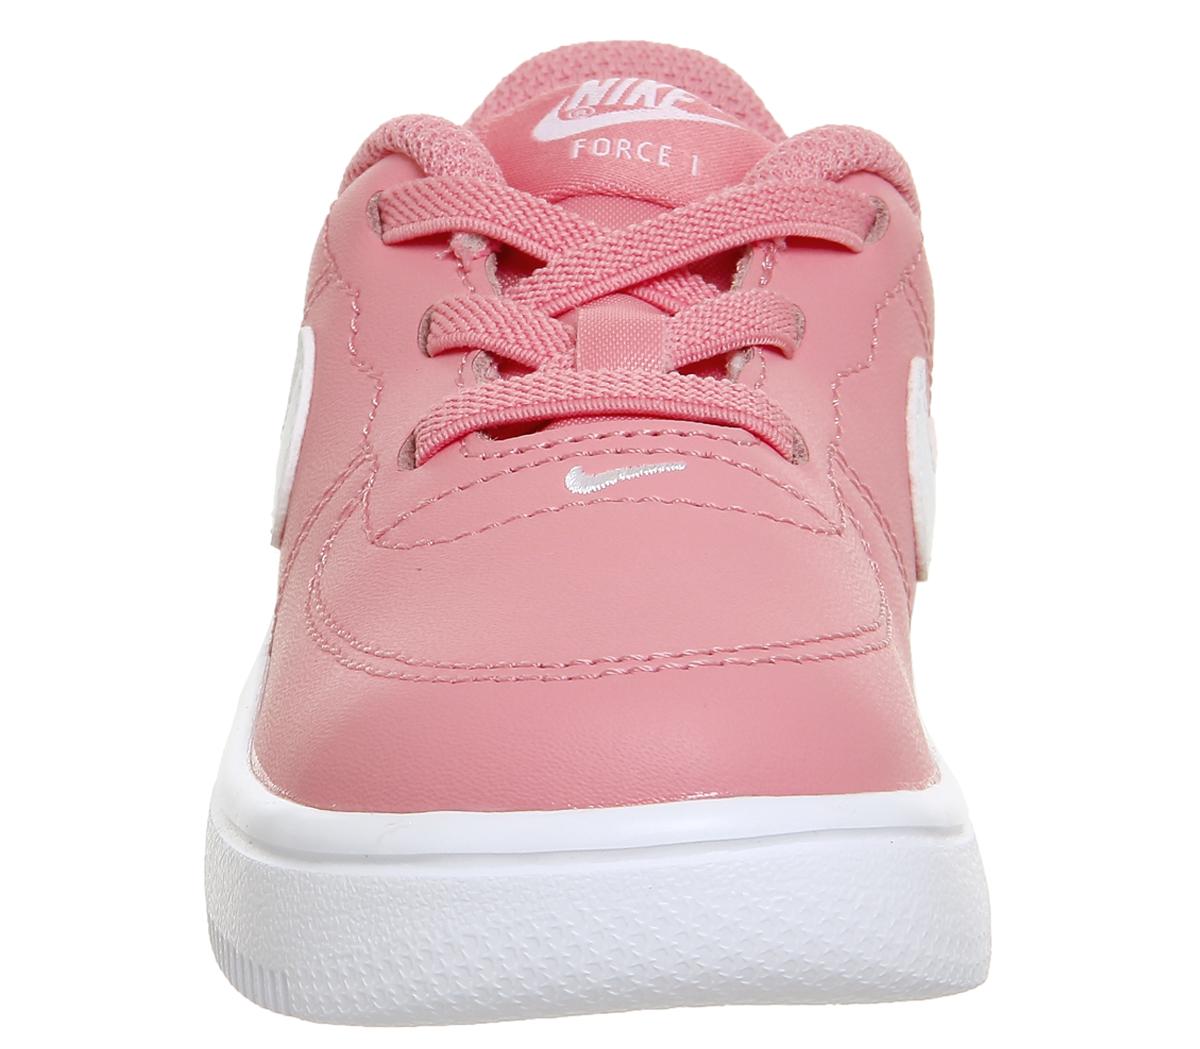 Nike Air Force 1 Infant Pink White - Unisex